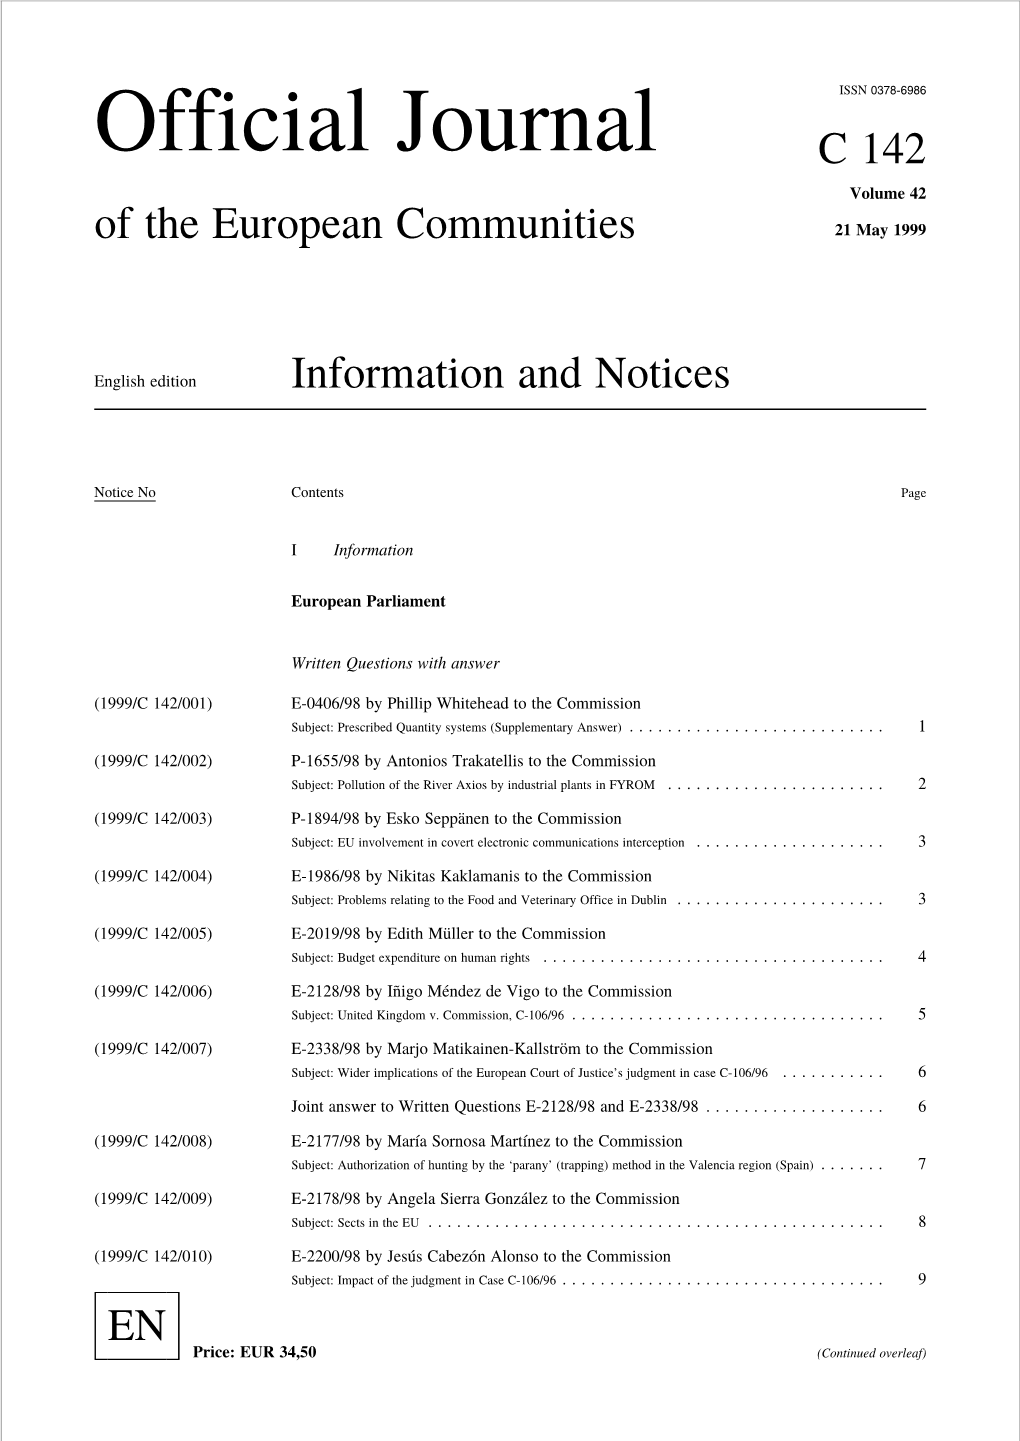 Official Journal C 142 Volume 42 of the European Communities 21 May 1999